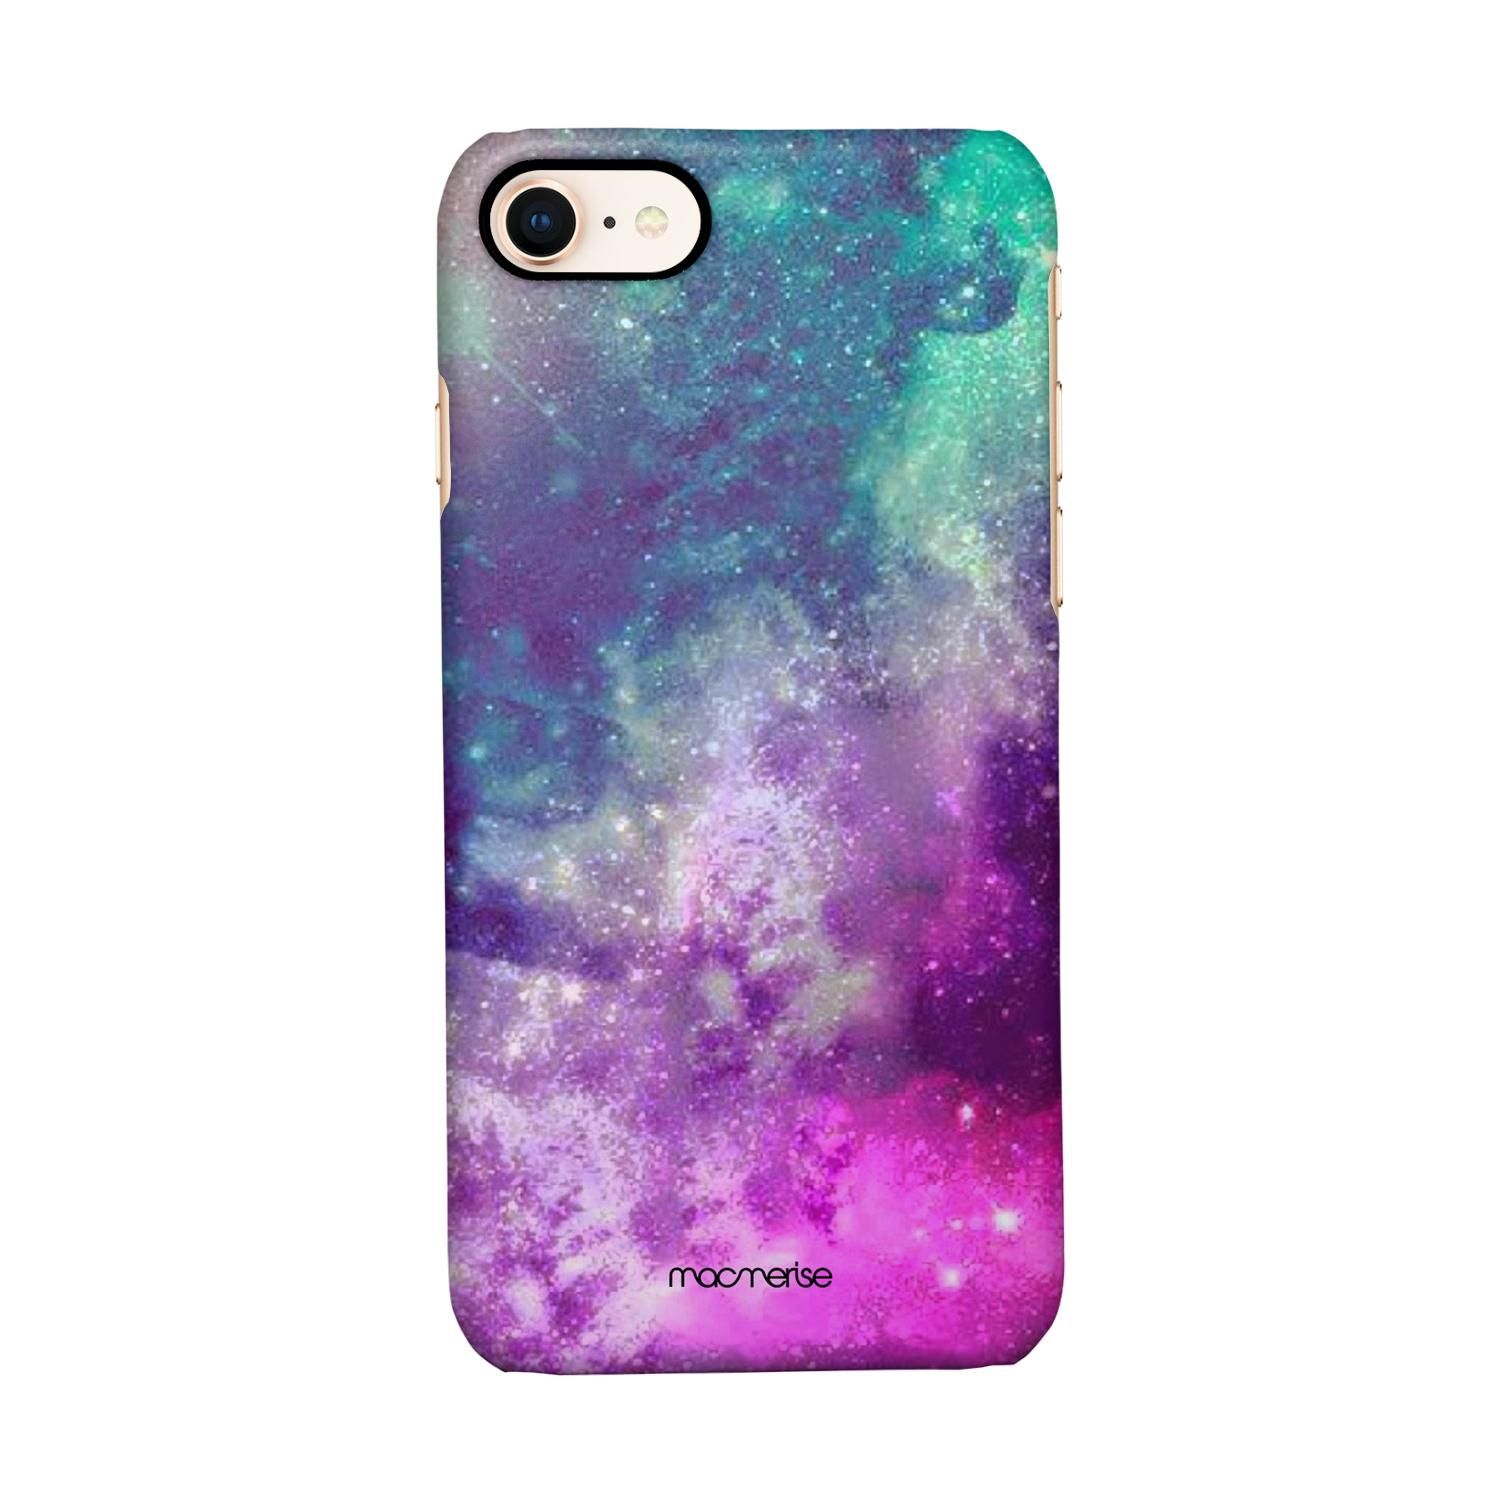 Buy The Twilight Effect - Sleek Phone Case for iPhone 8 Online